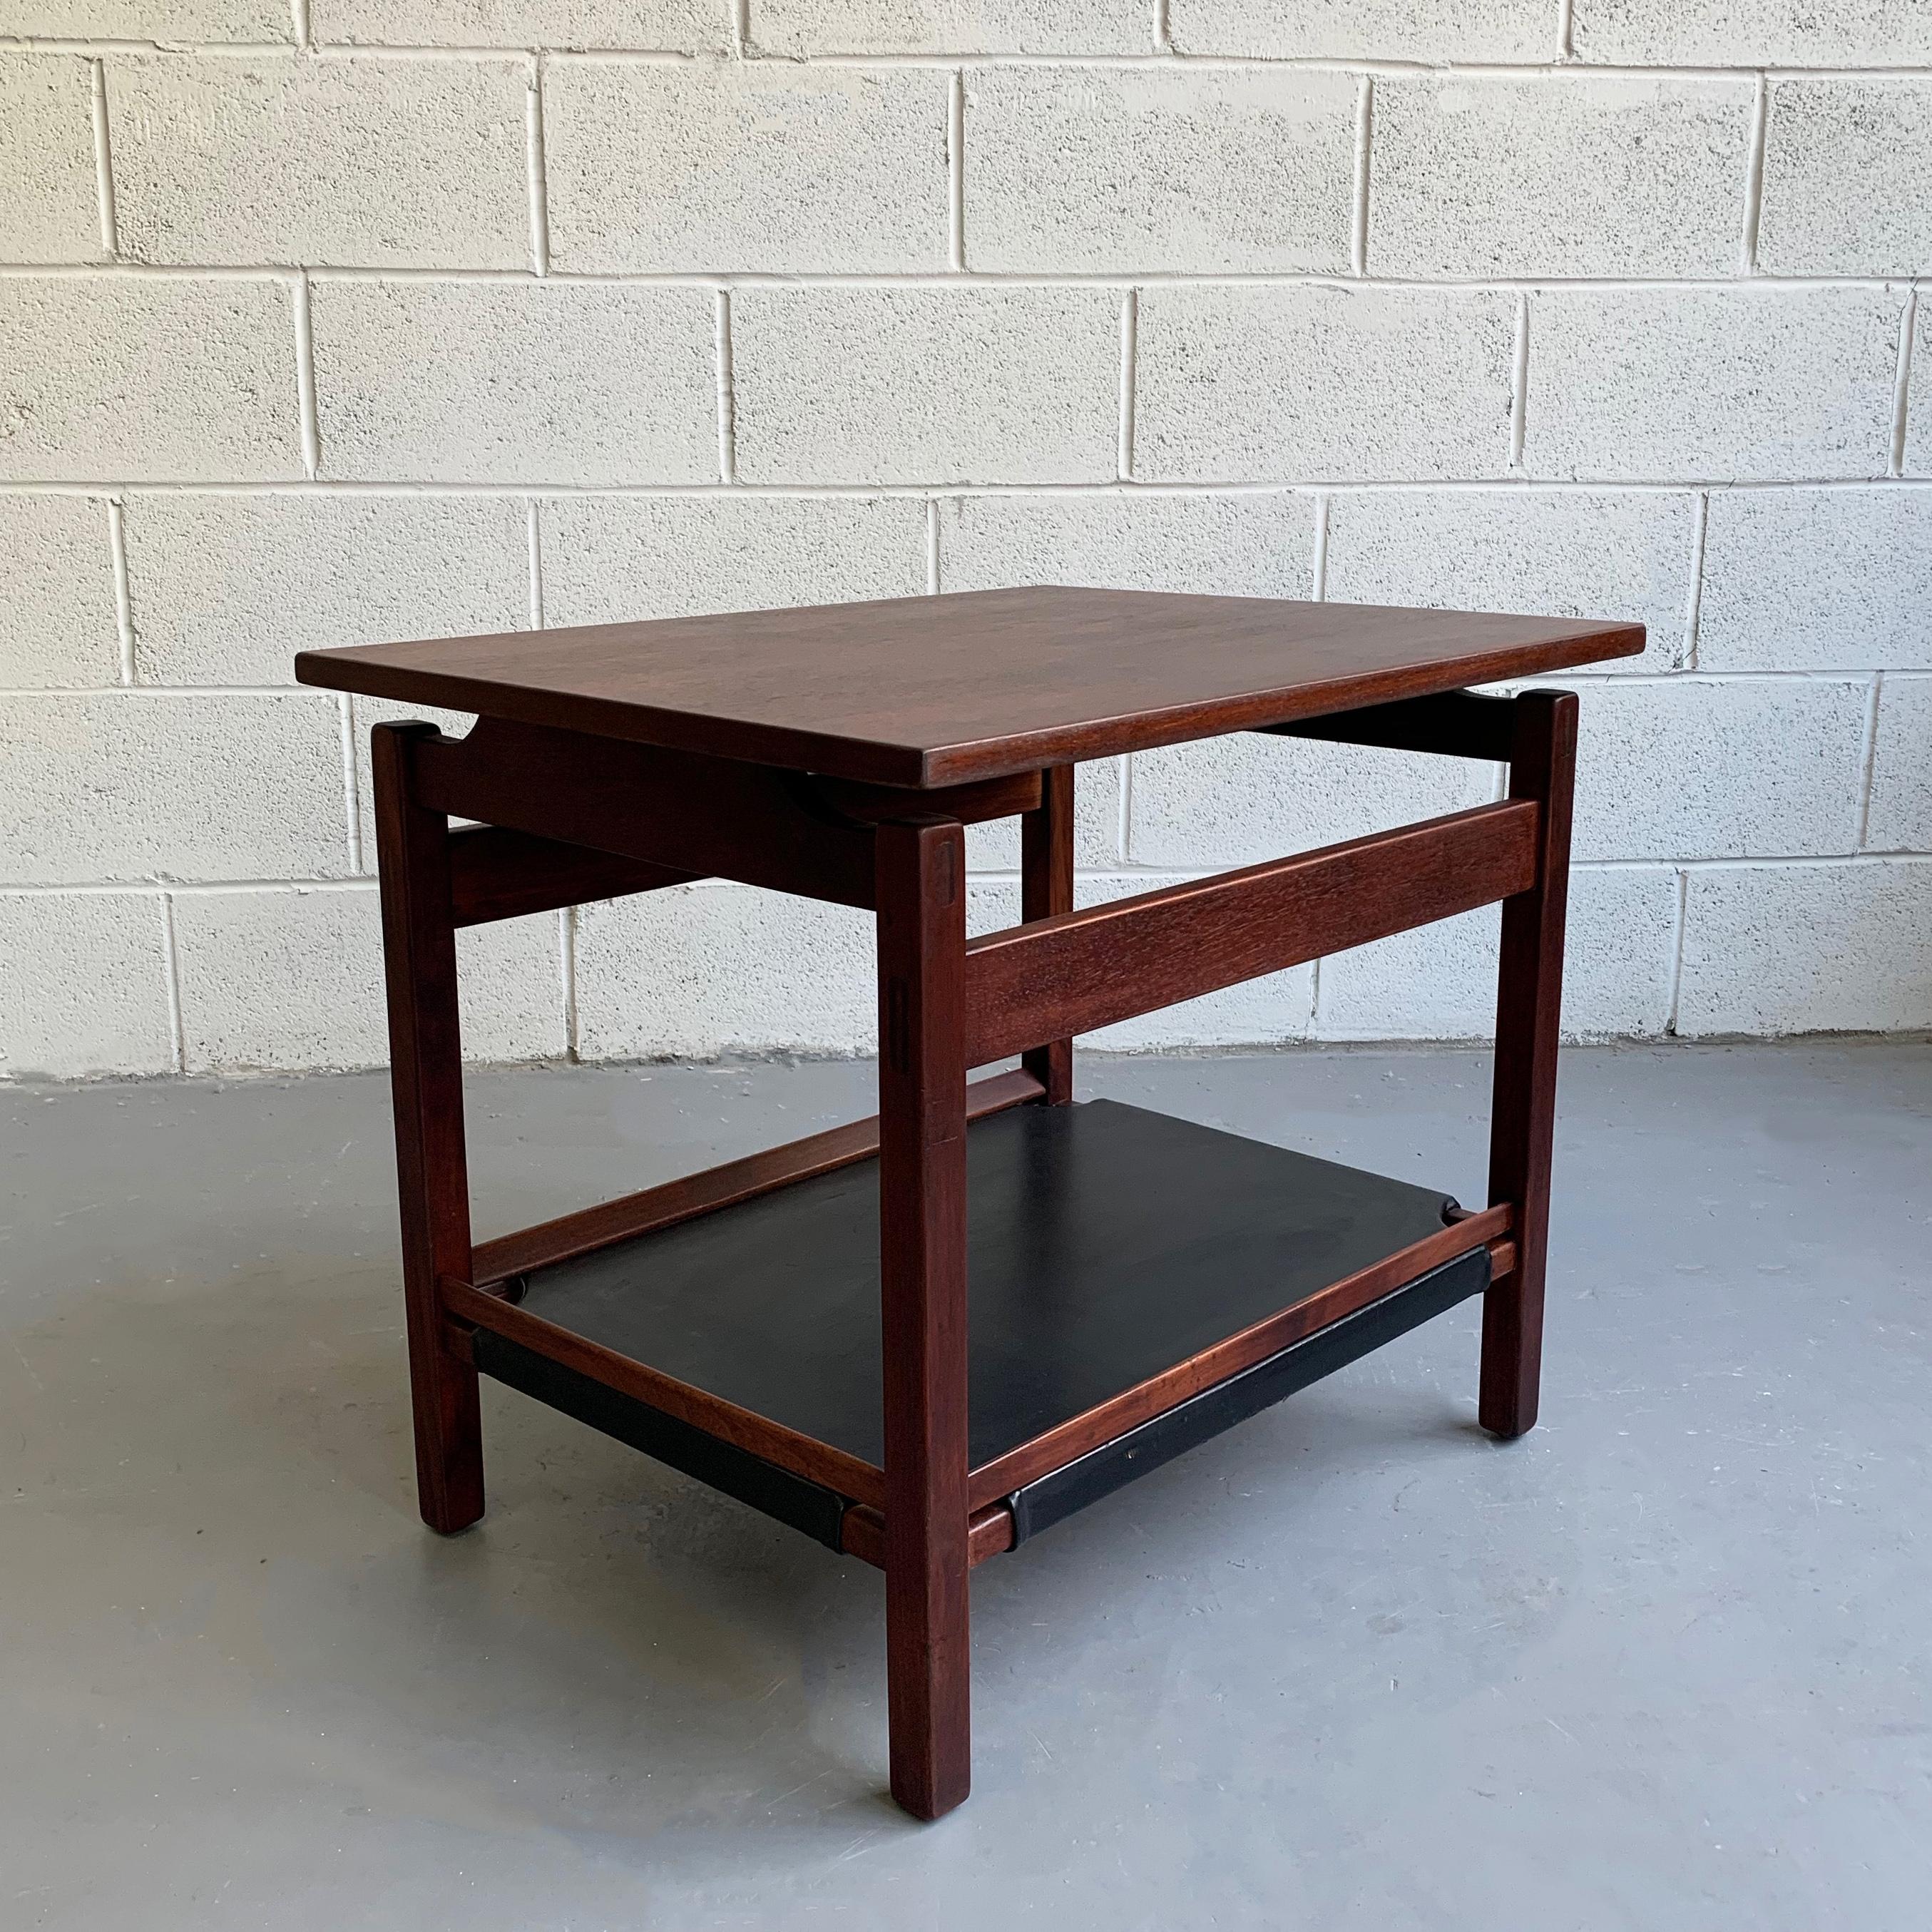 Danish modern, teak side table features a floating top and lower leather tier perfect for magazines.